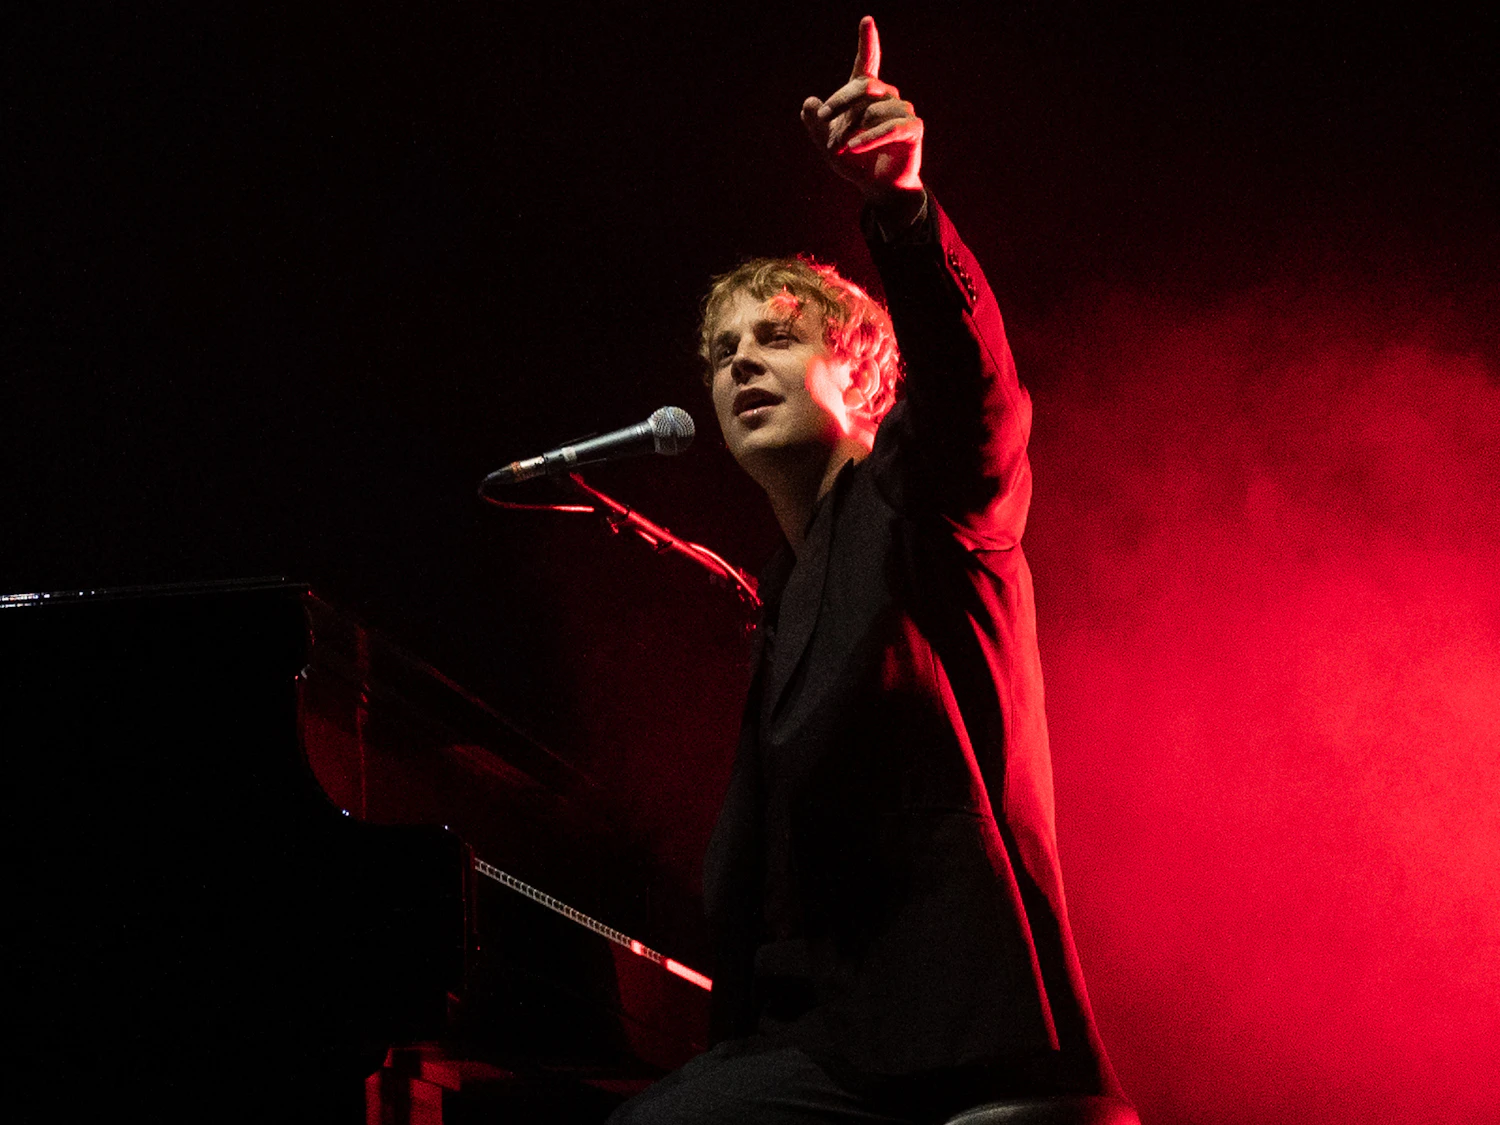 We stand together': Tom Odell reacts to 'Another Love' becoming viral  protest song